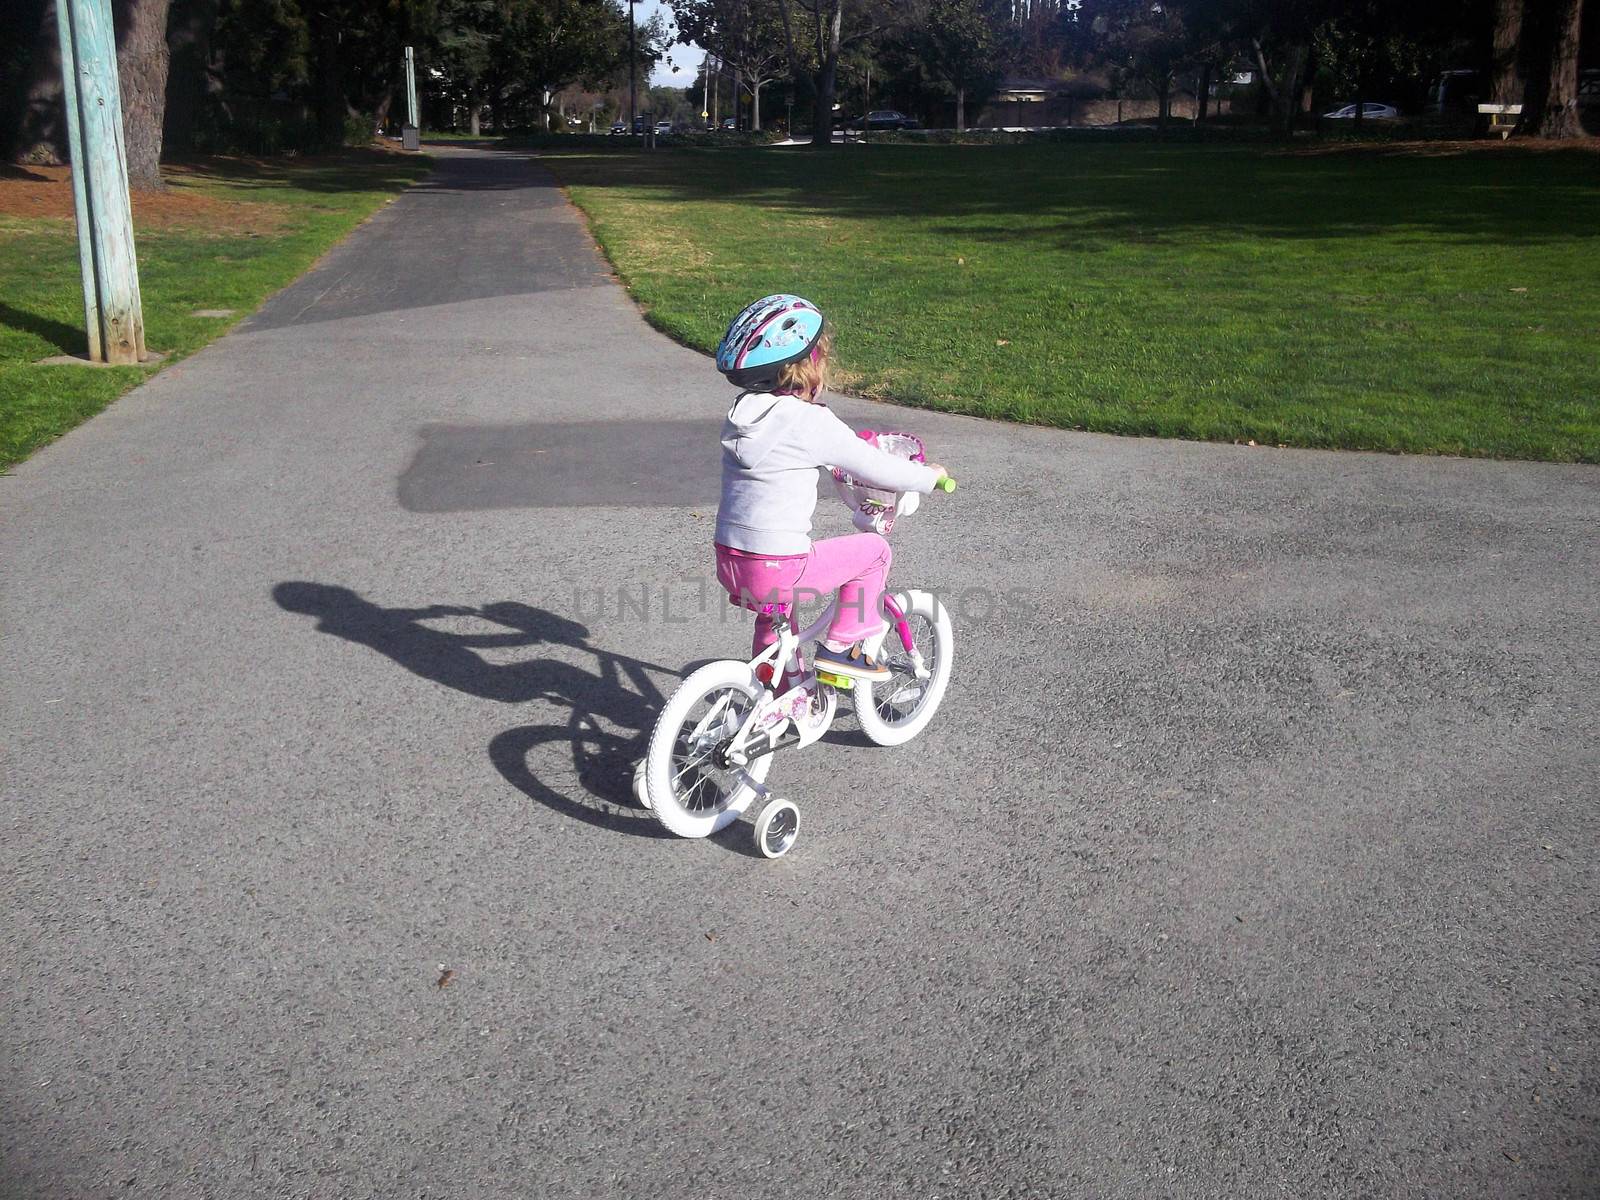 Trying new bicycle for first time on a ride in a park.